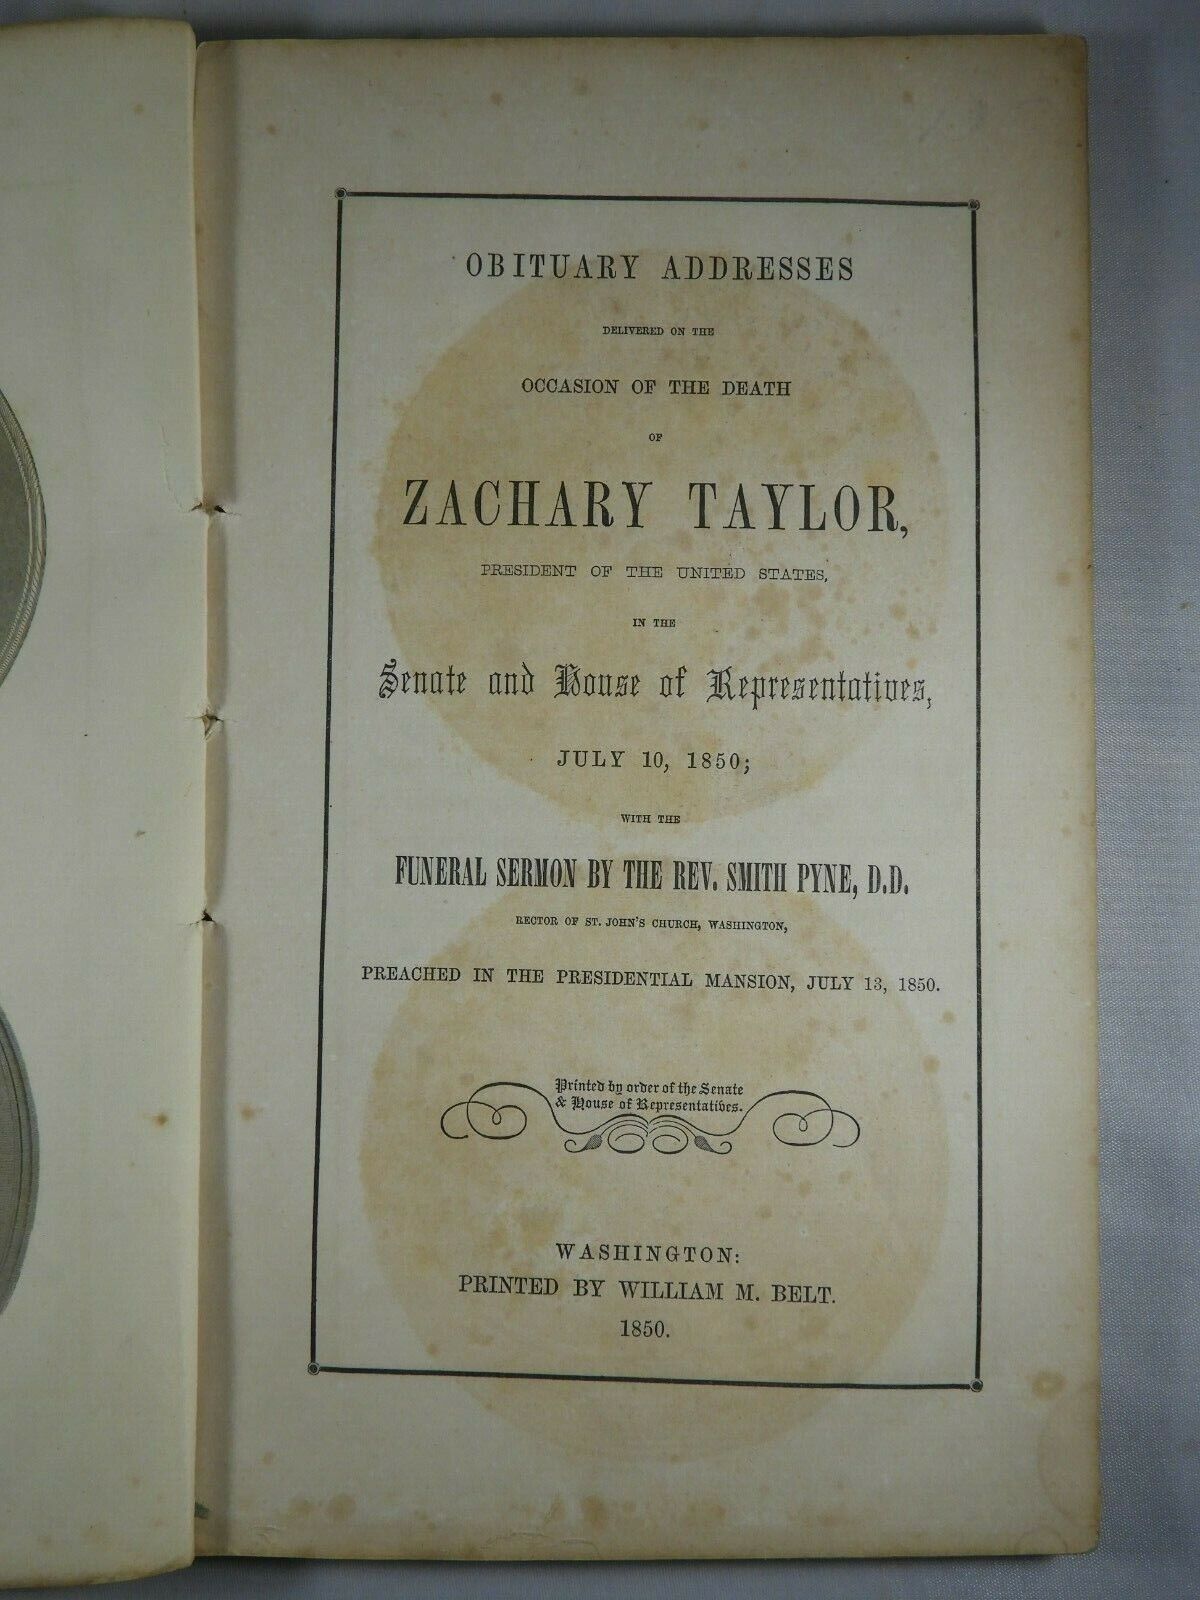 Eulogies Given by White House & US Congress on Death of President Zachary Taylor